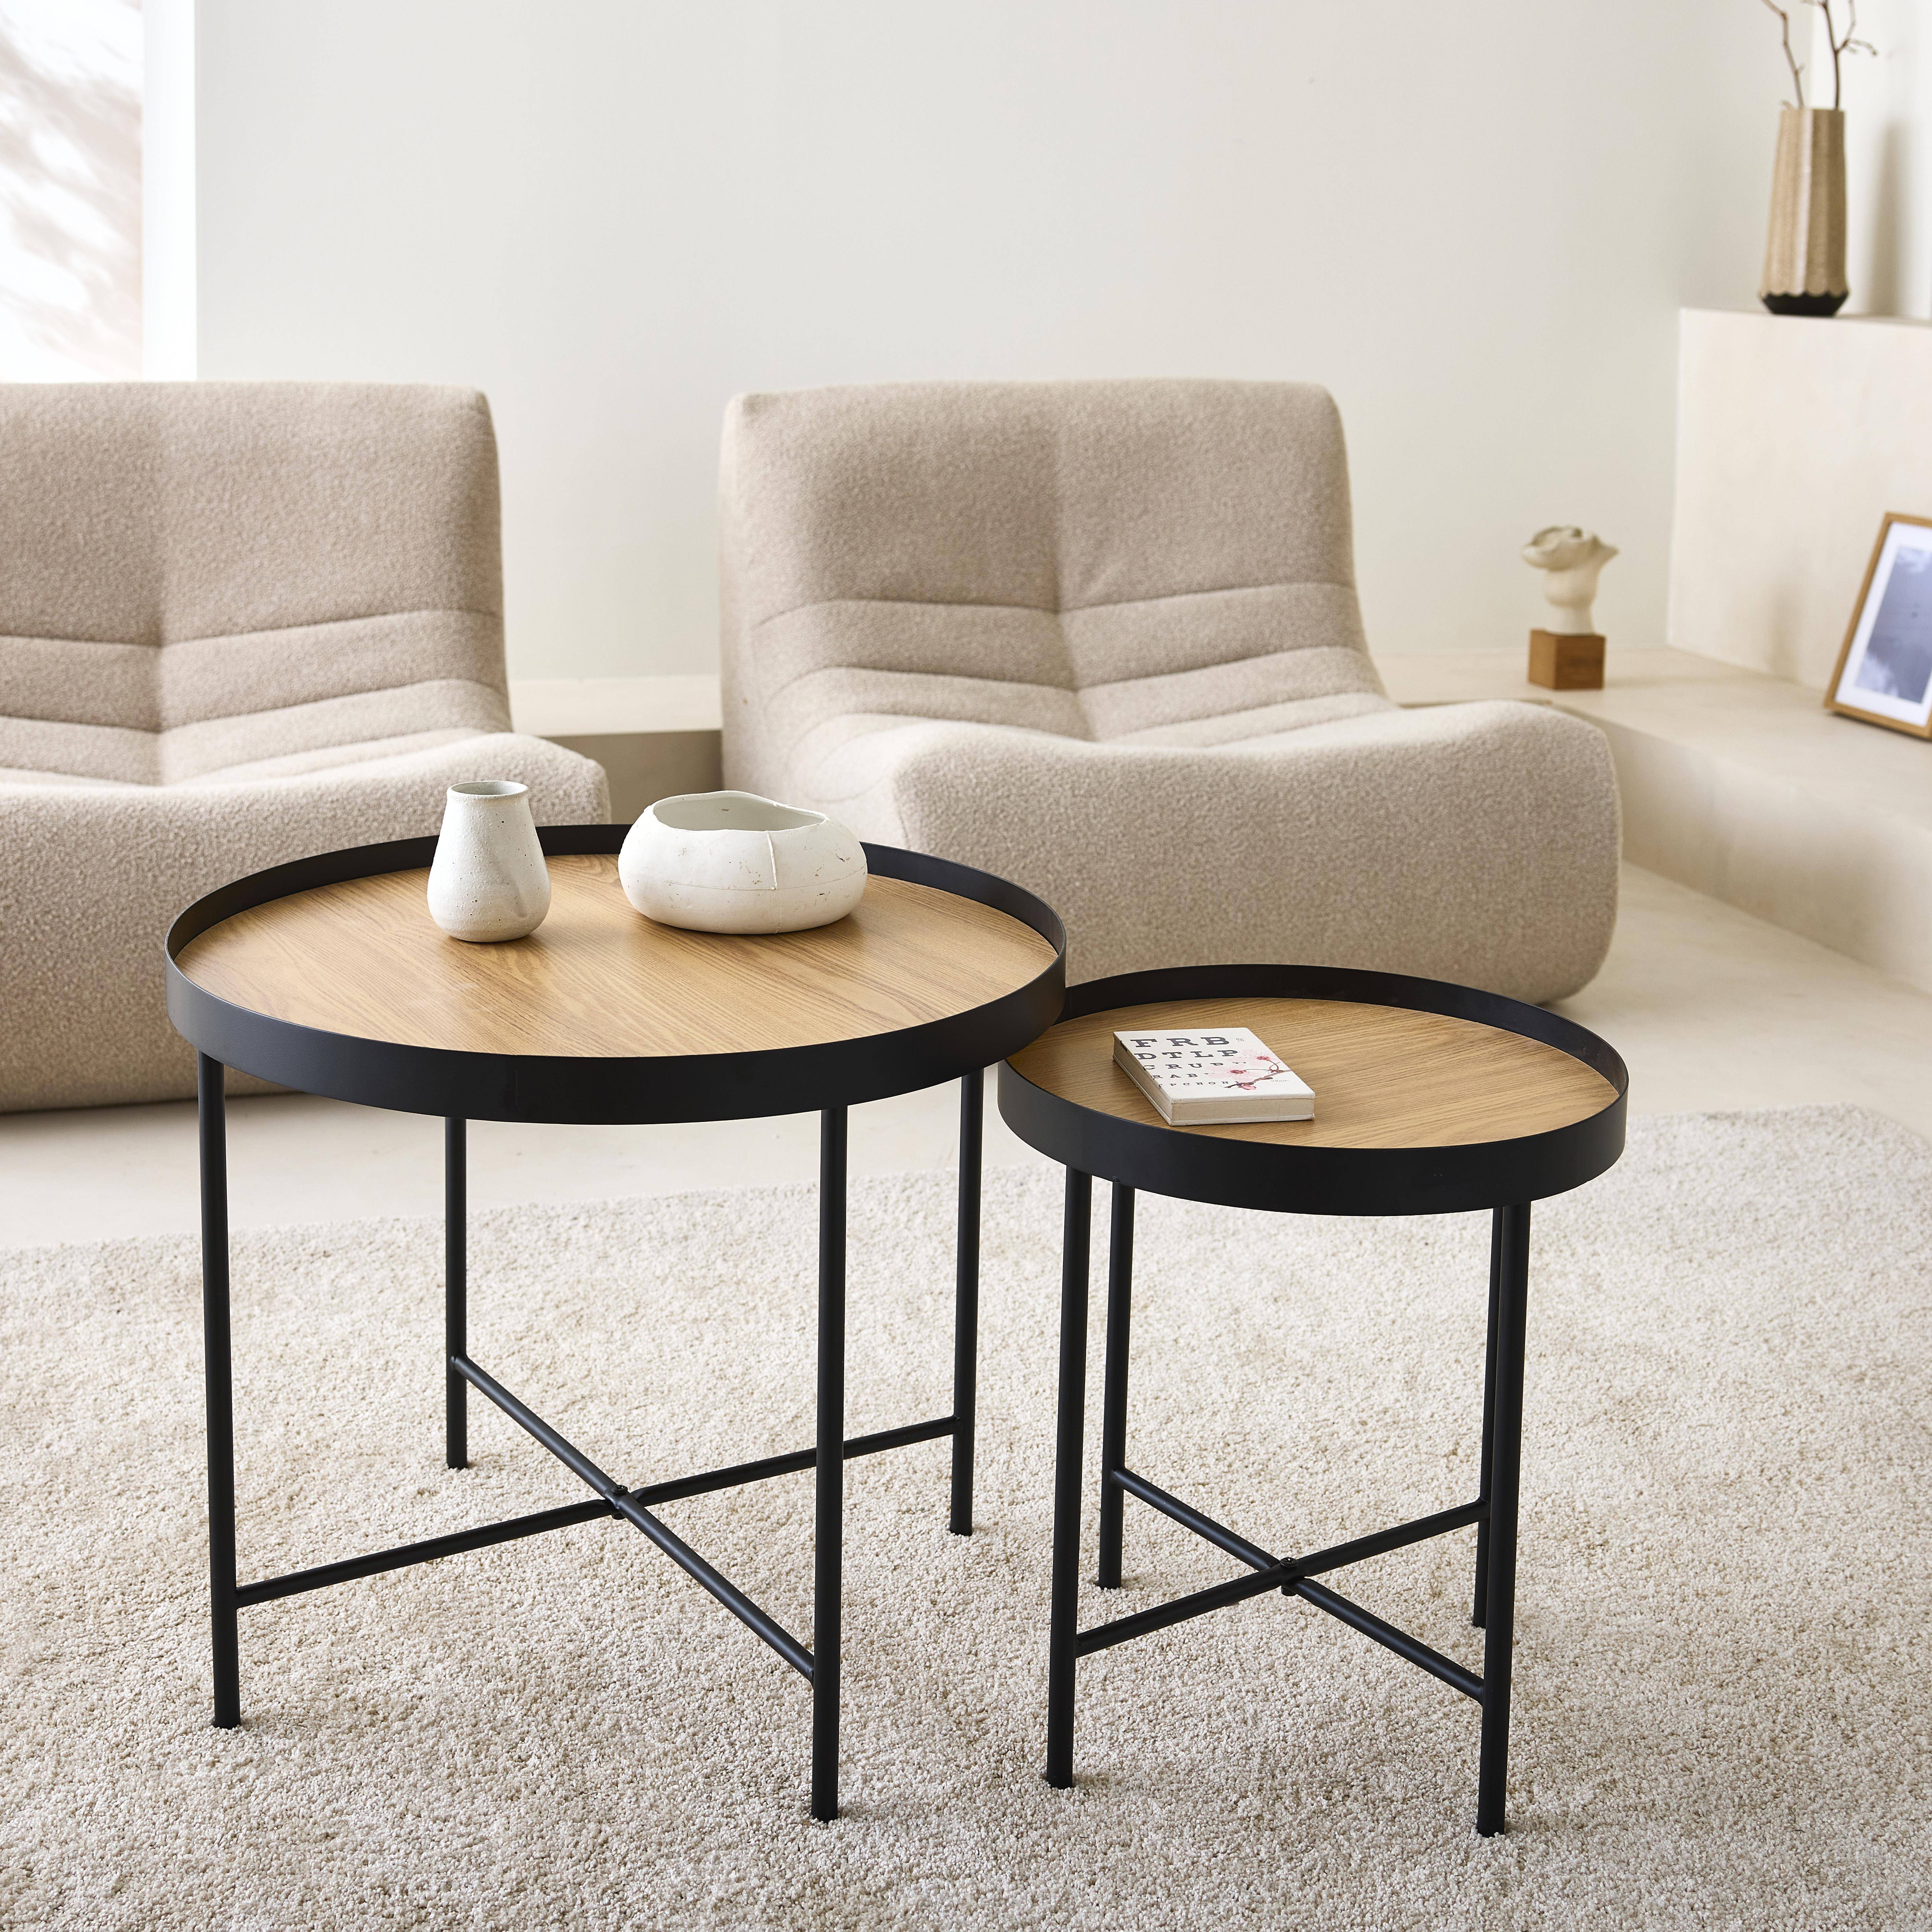 Set of 2 practical round nesting tables in oak-effect MDF with black legs,sweeek,Photo1